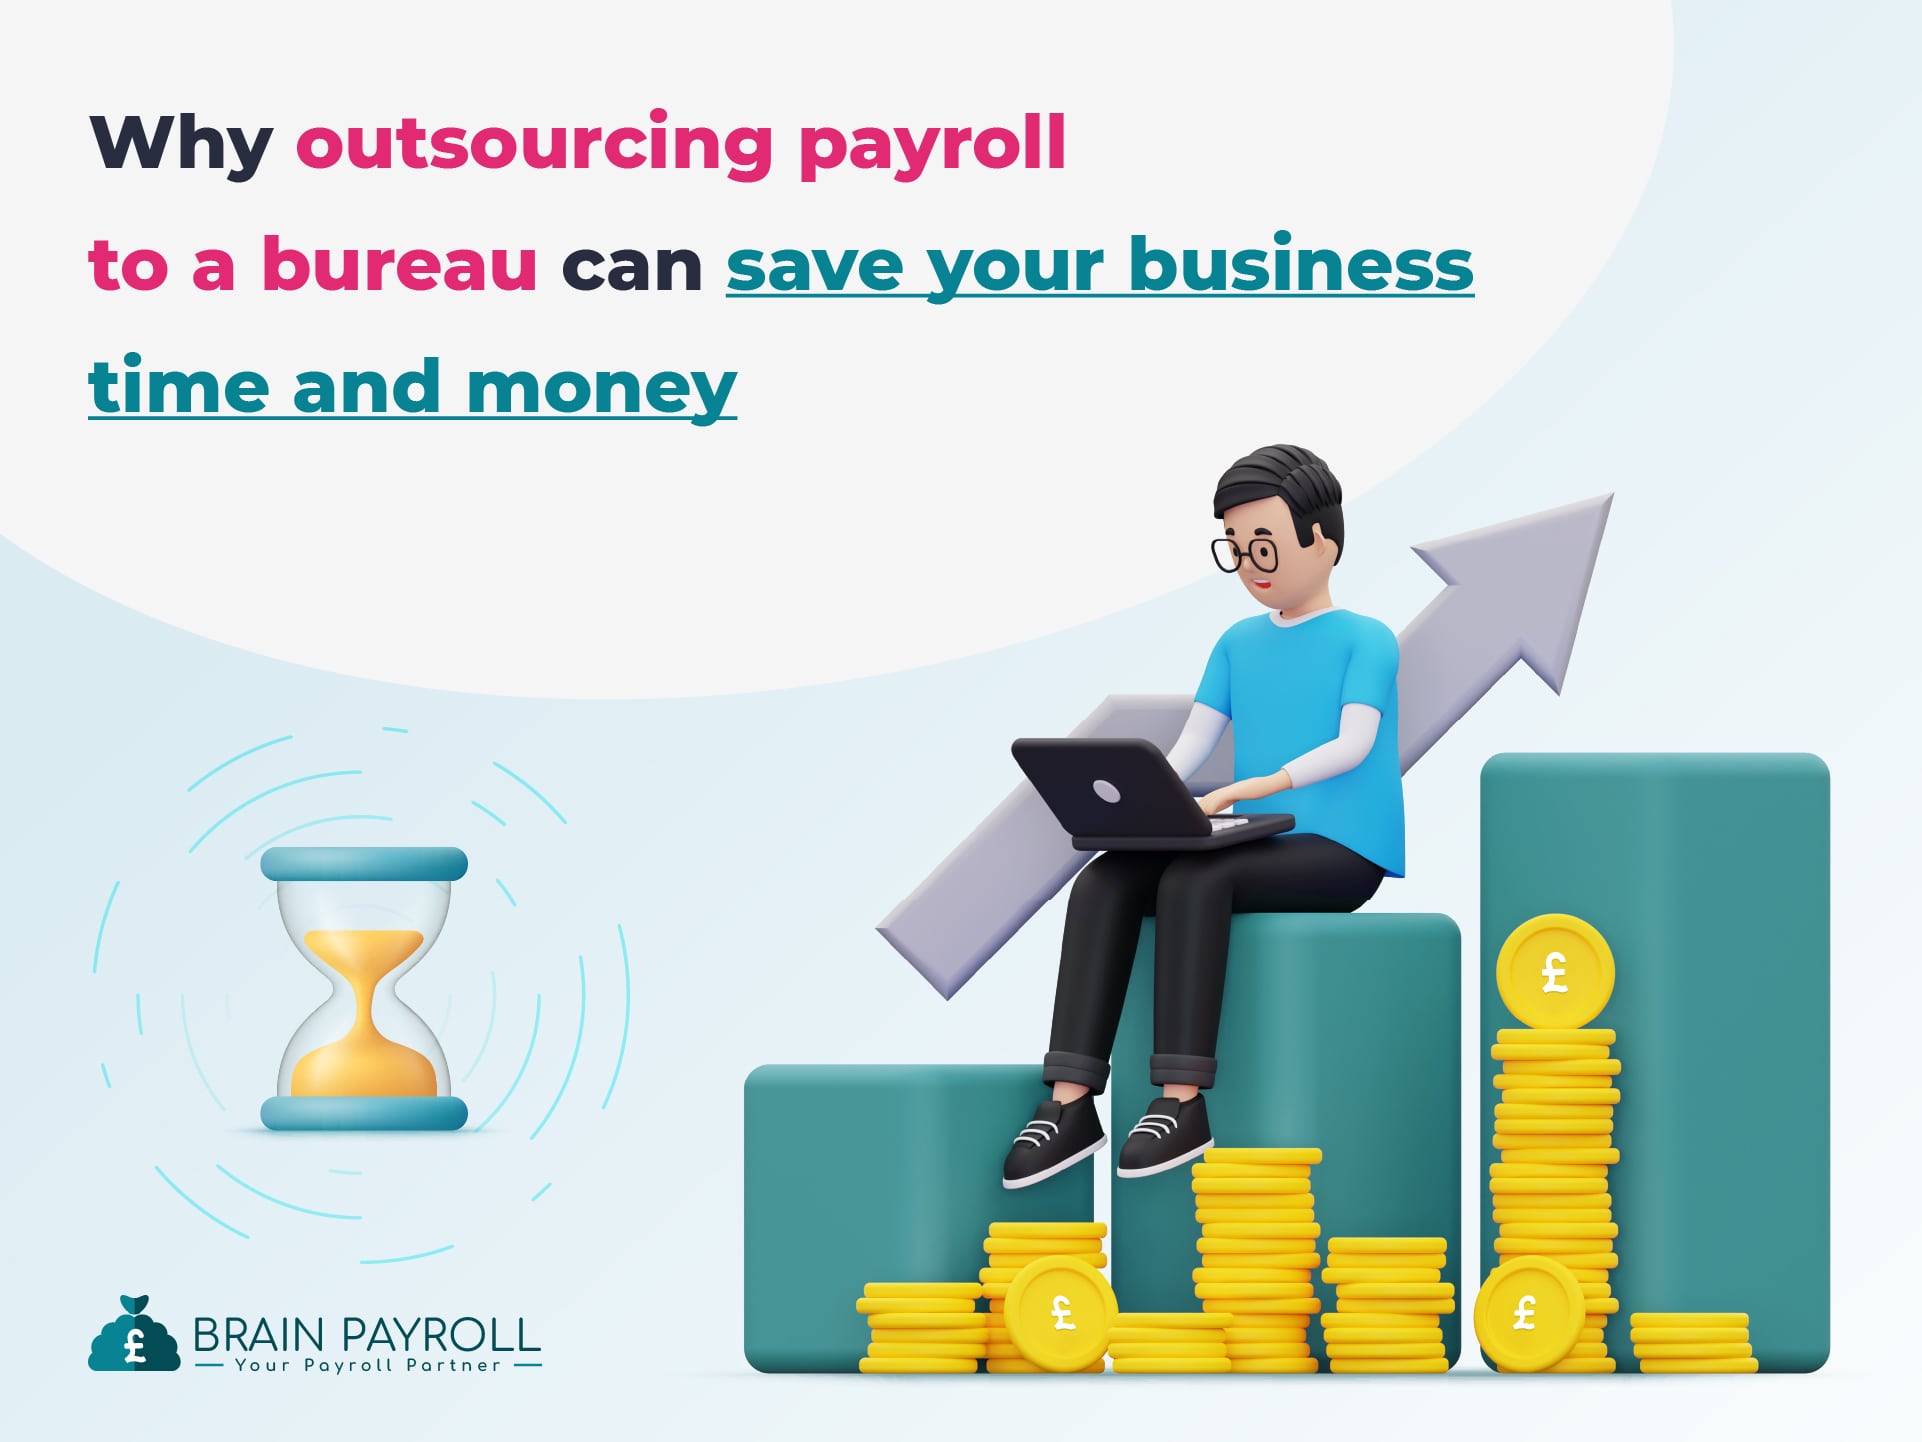 Why Outsourcing Payroll To a Bureau Can Save Your Business Time and Money